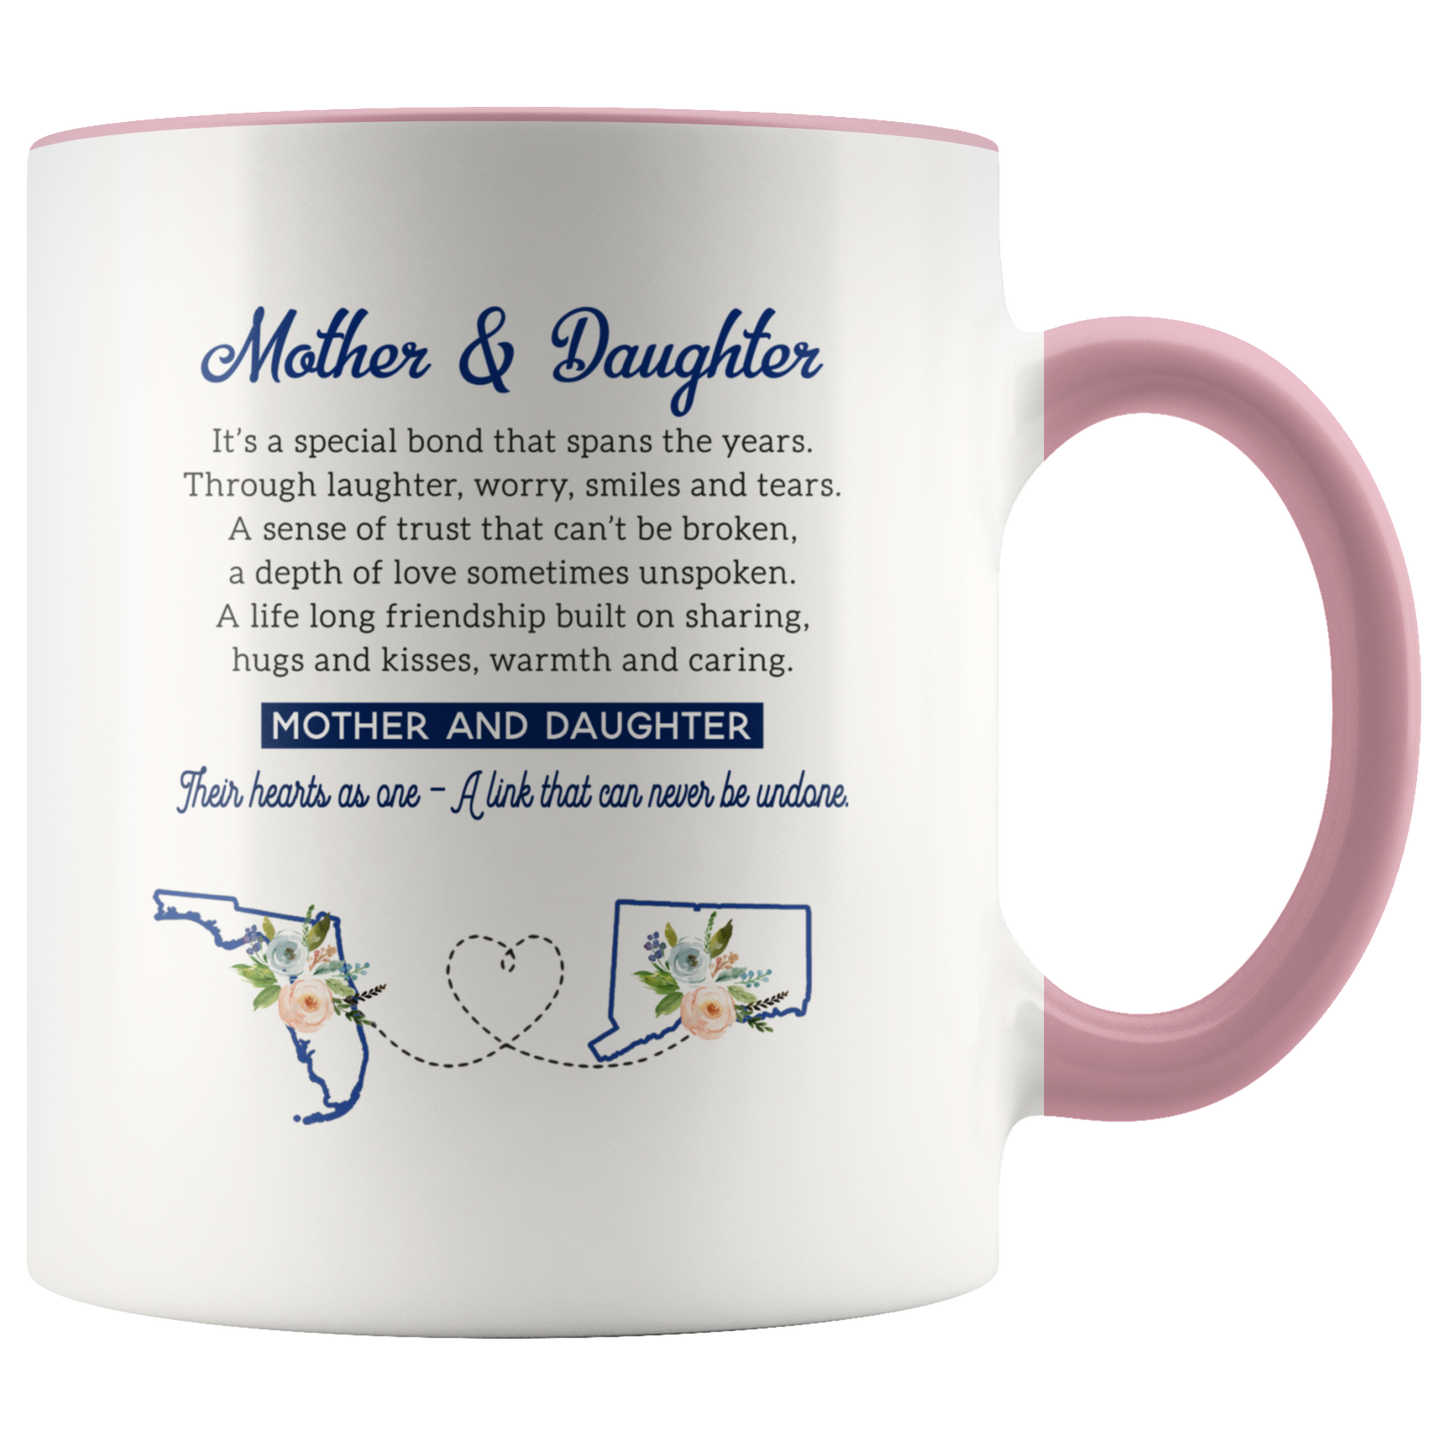 ND-21357588-sp-23419 - Long Distance Mom And Daughter Gifts - Mother And Daughter.